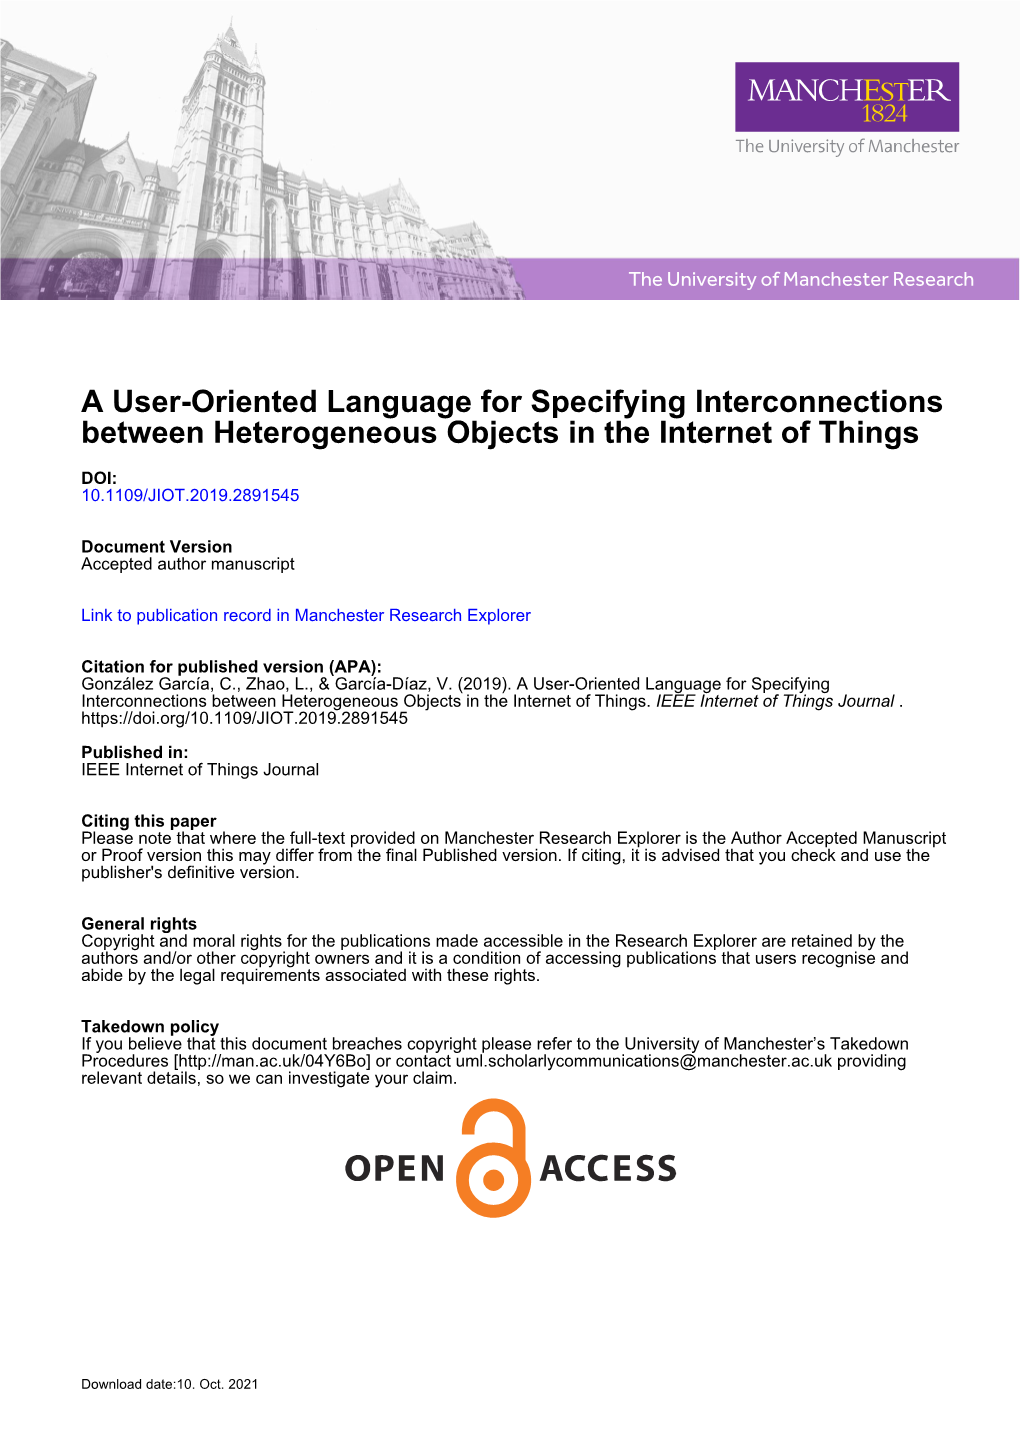 A User-Oriented Language for Specifying Interconnections Between Heterogeneous Objects in the Internet of Things